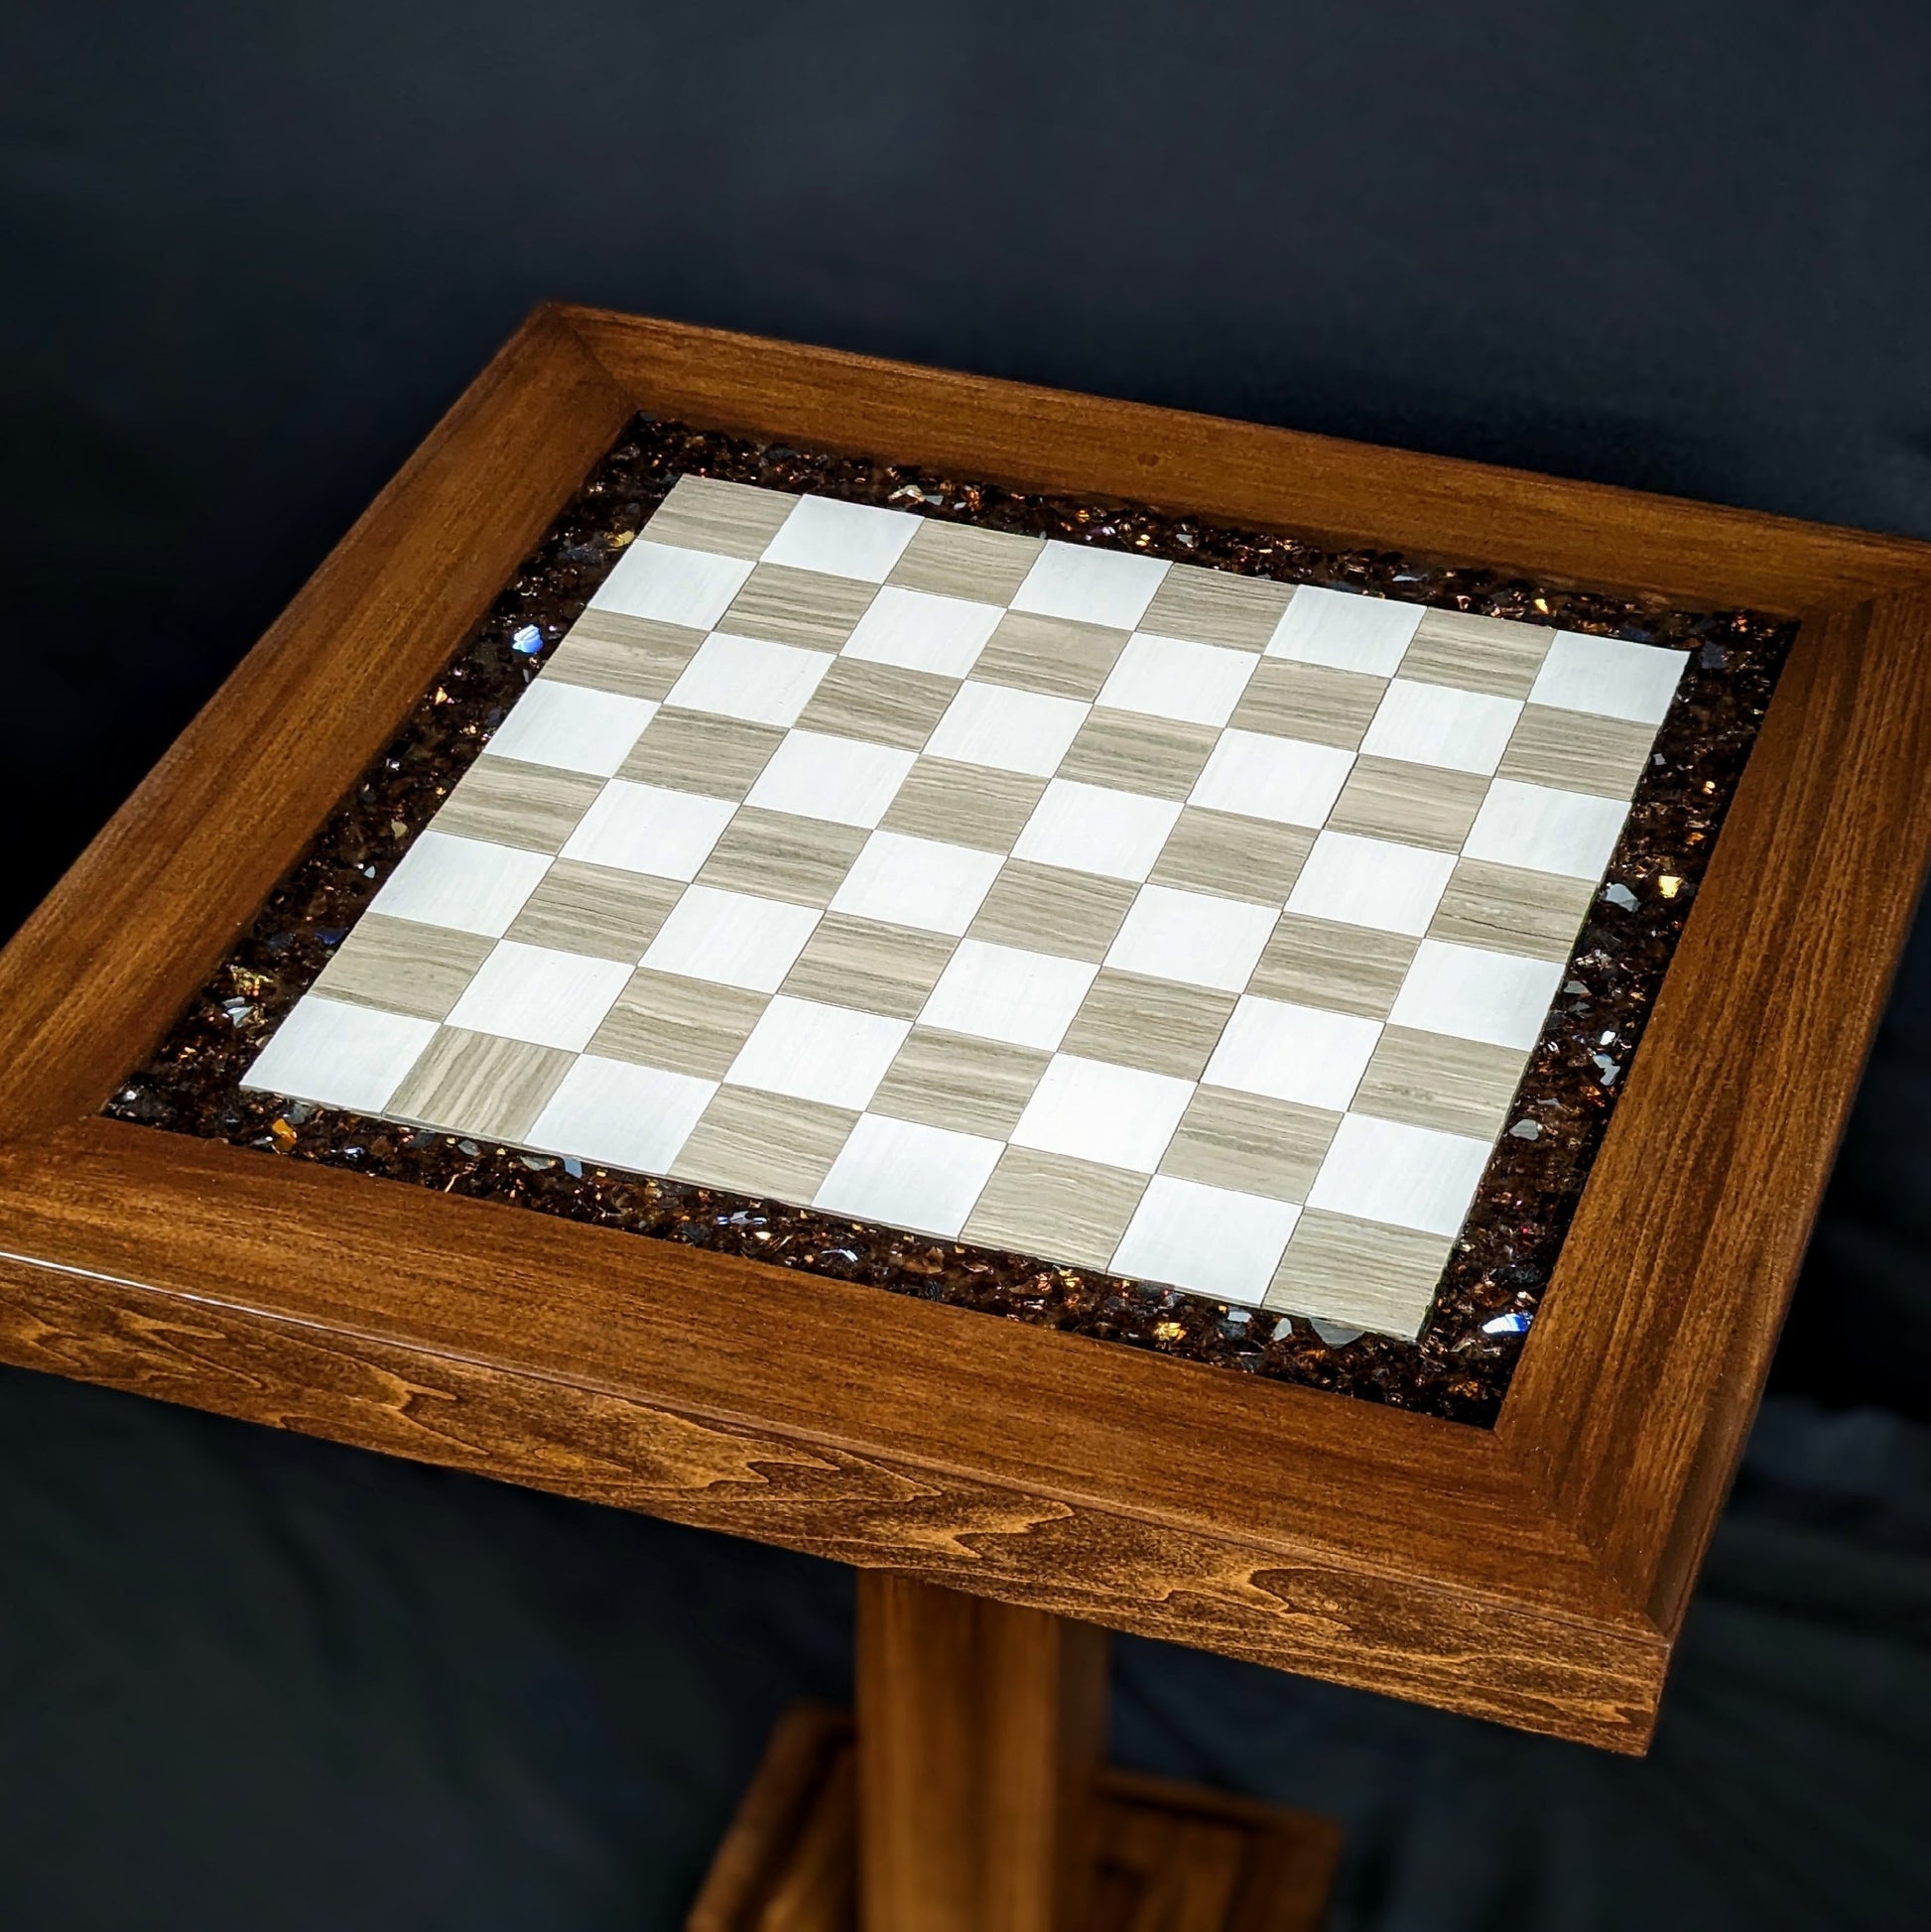 The Rook (Brown) Chess Table - Ceramic Tile LED Illuminated Resin Solid Wood Table, Handmade Artisan Chess Pedestal Game Table